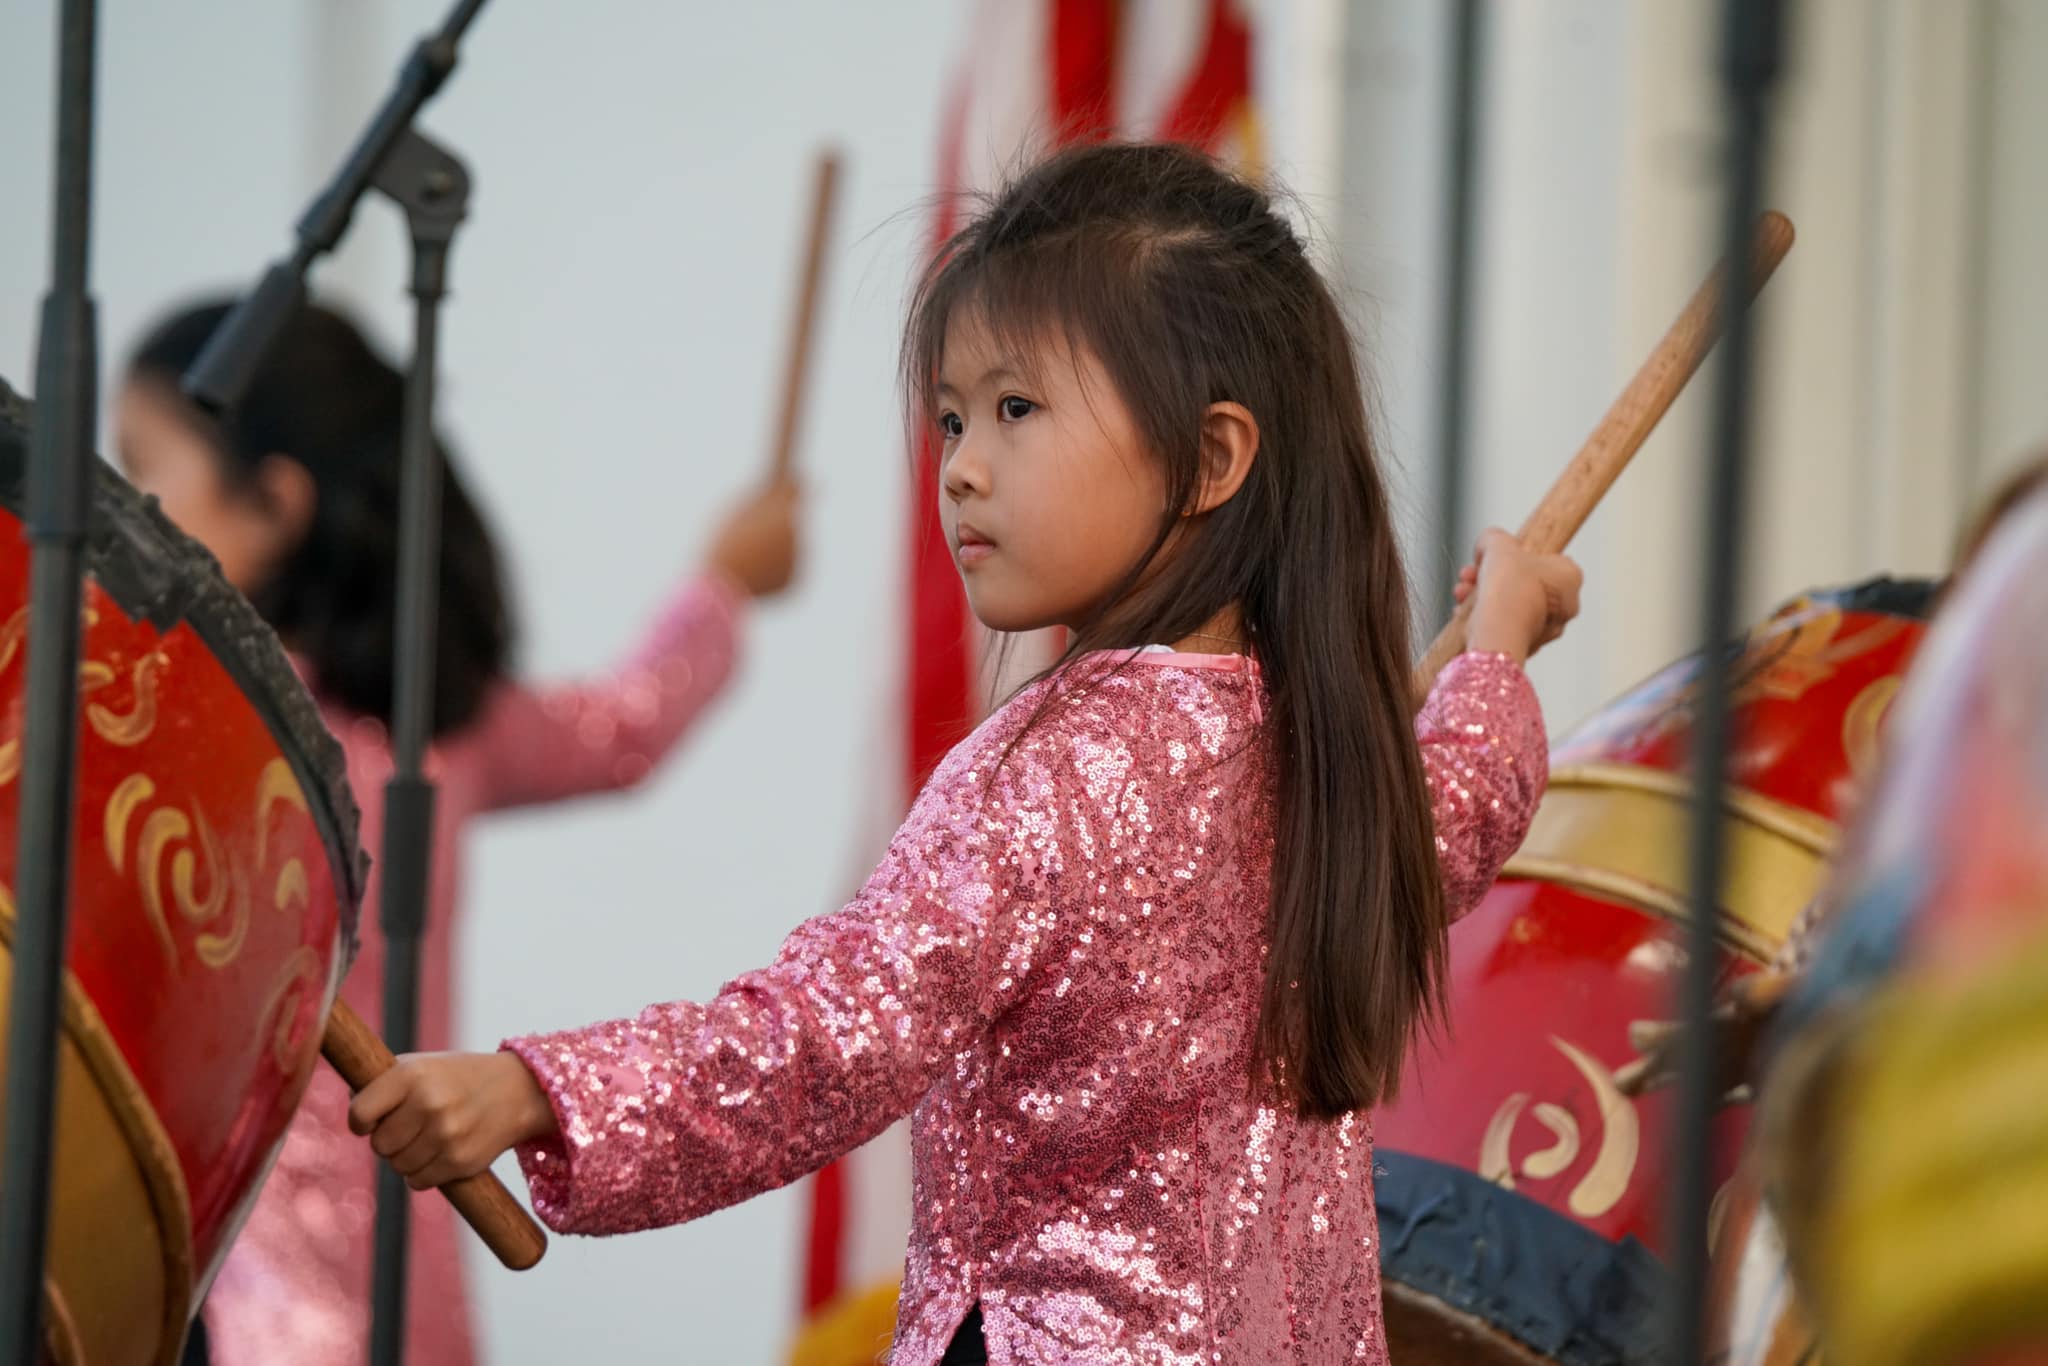 A girl with black hair wearing pink clothing holds a stick while playing a large drum.